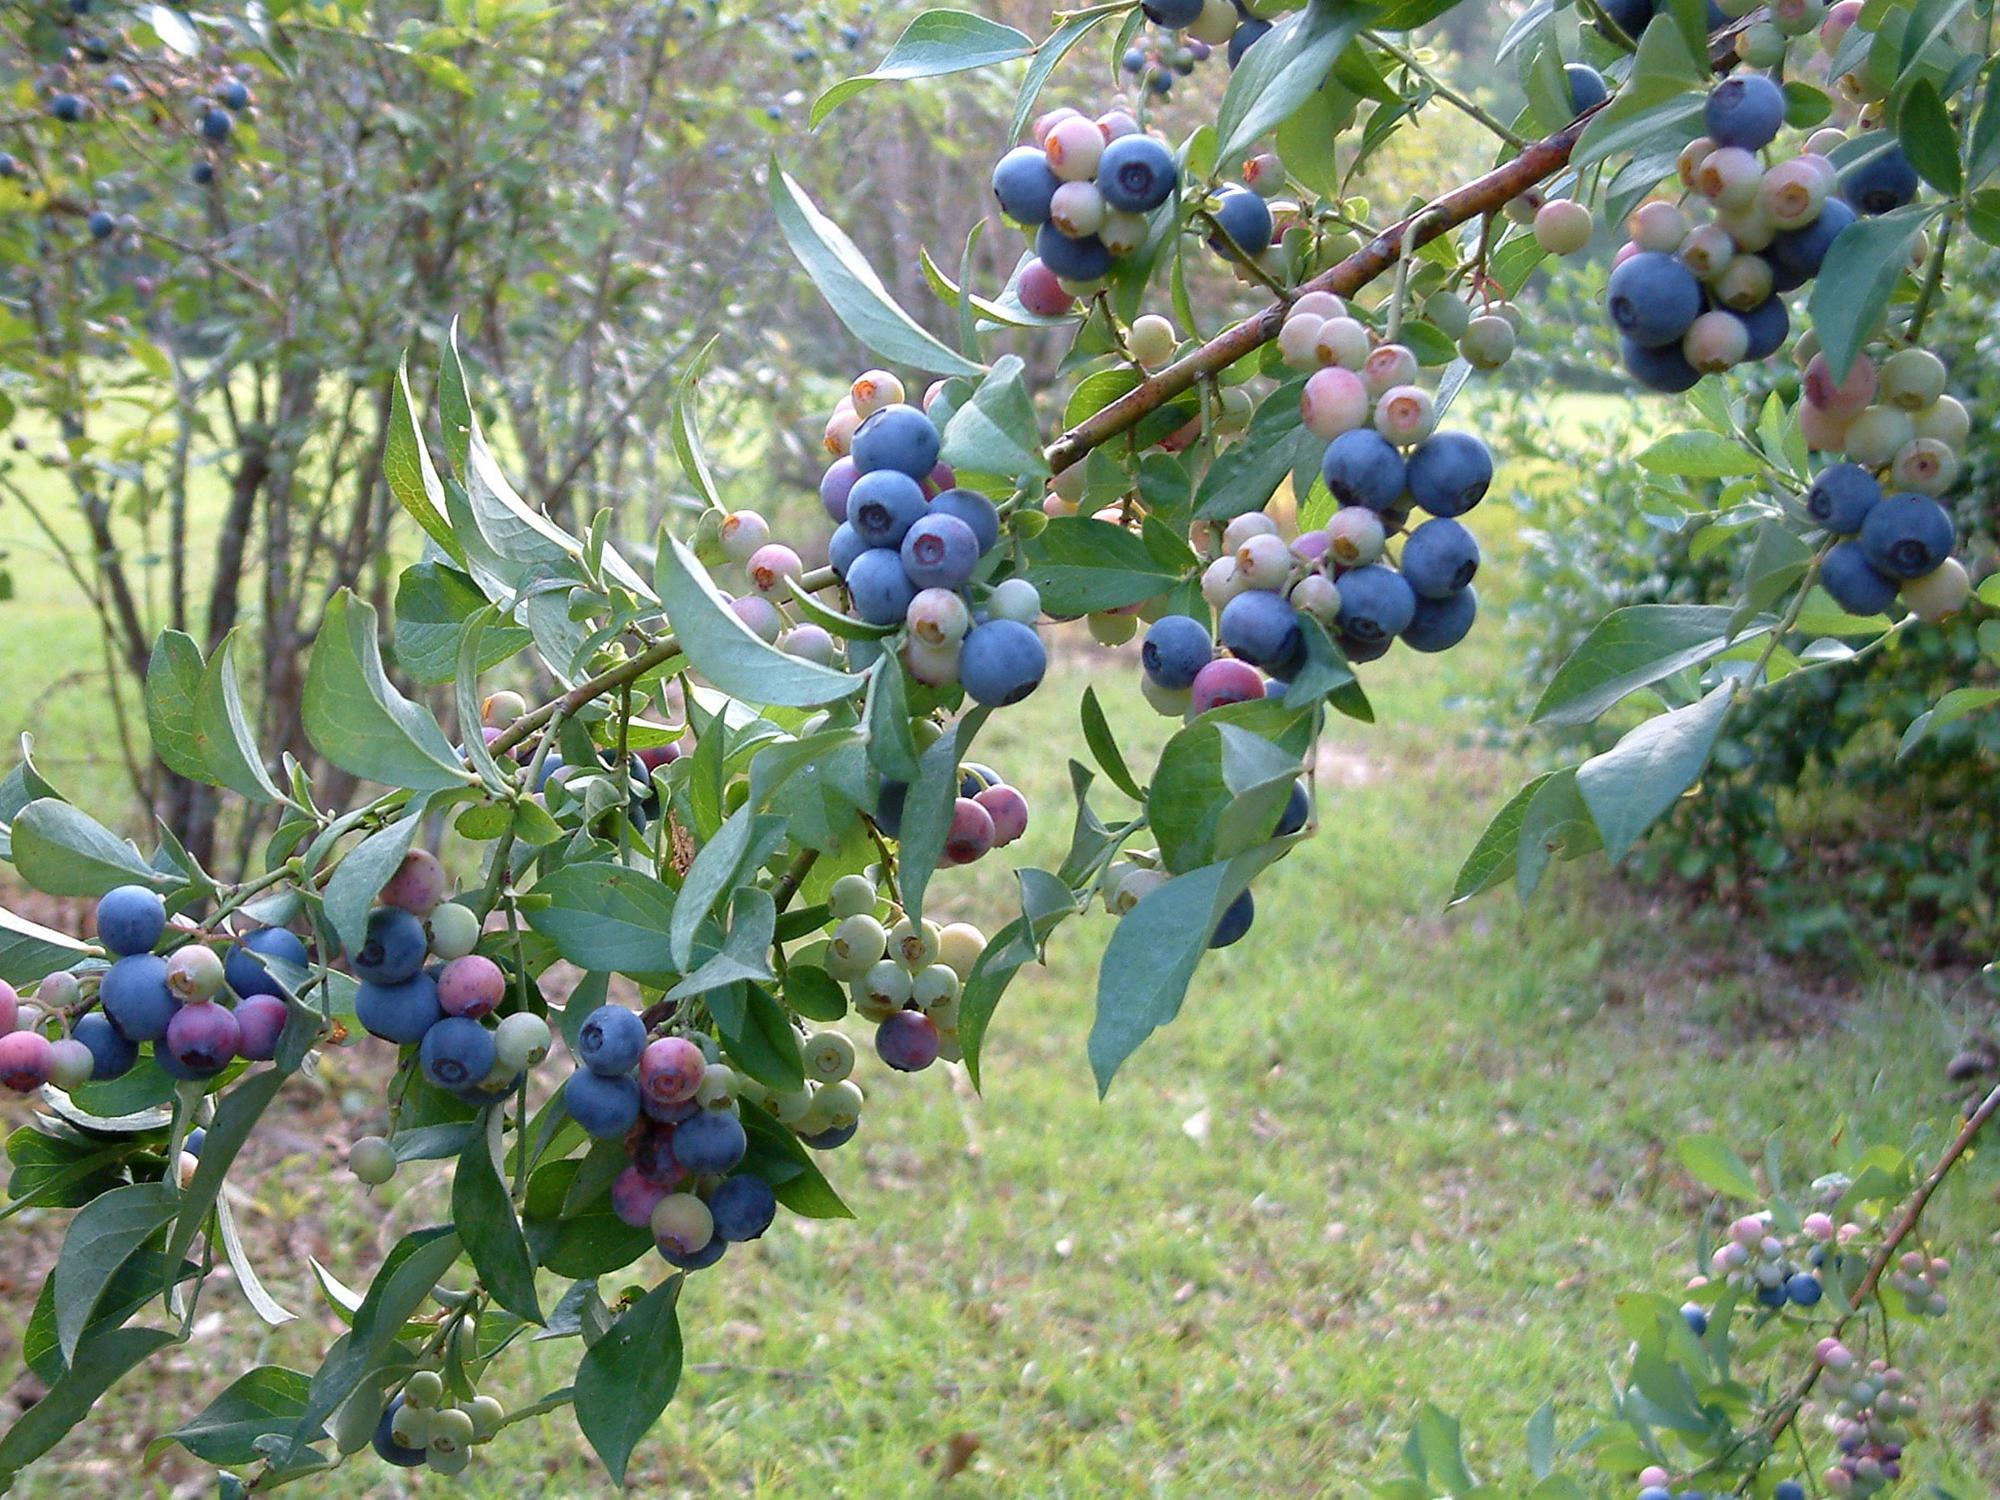 Rabbiteye blueberries make up 80 to 90 percent of the Mississippi’s blueberry crop. Recent dry weather has made harvesting easier than normal. (Photo by MSU Extension Service/File)